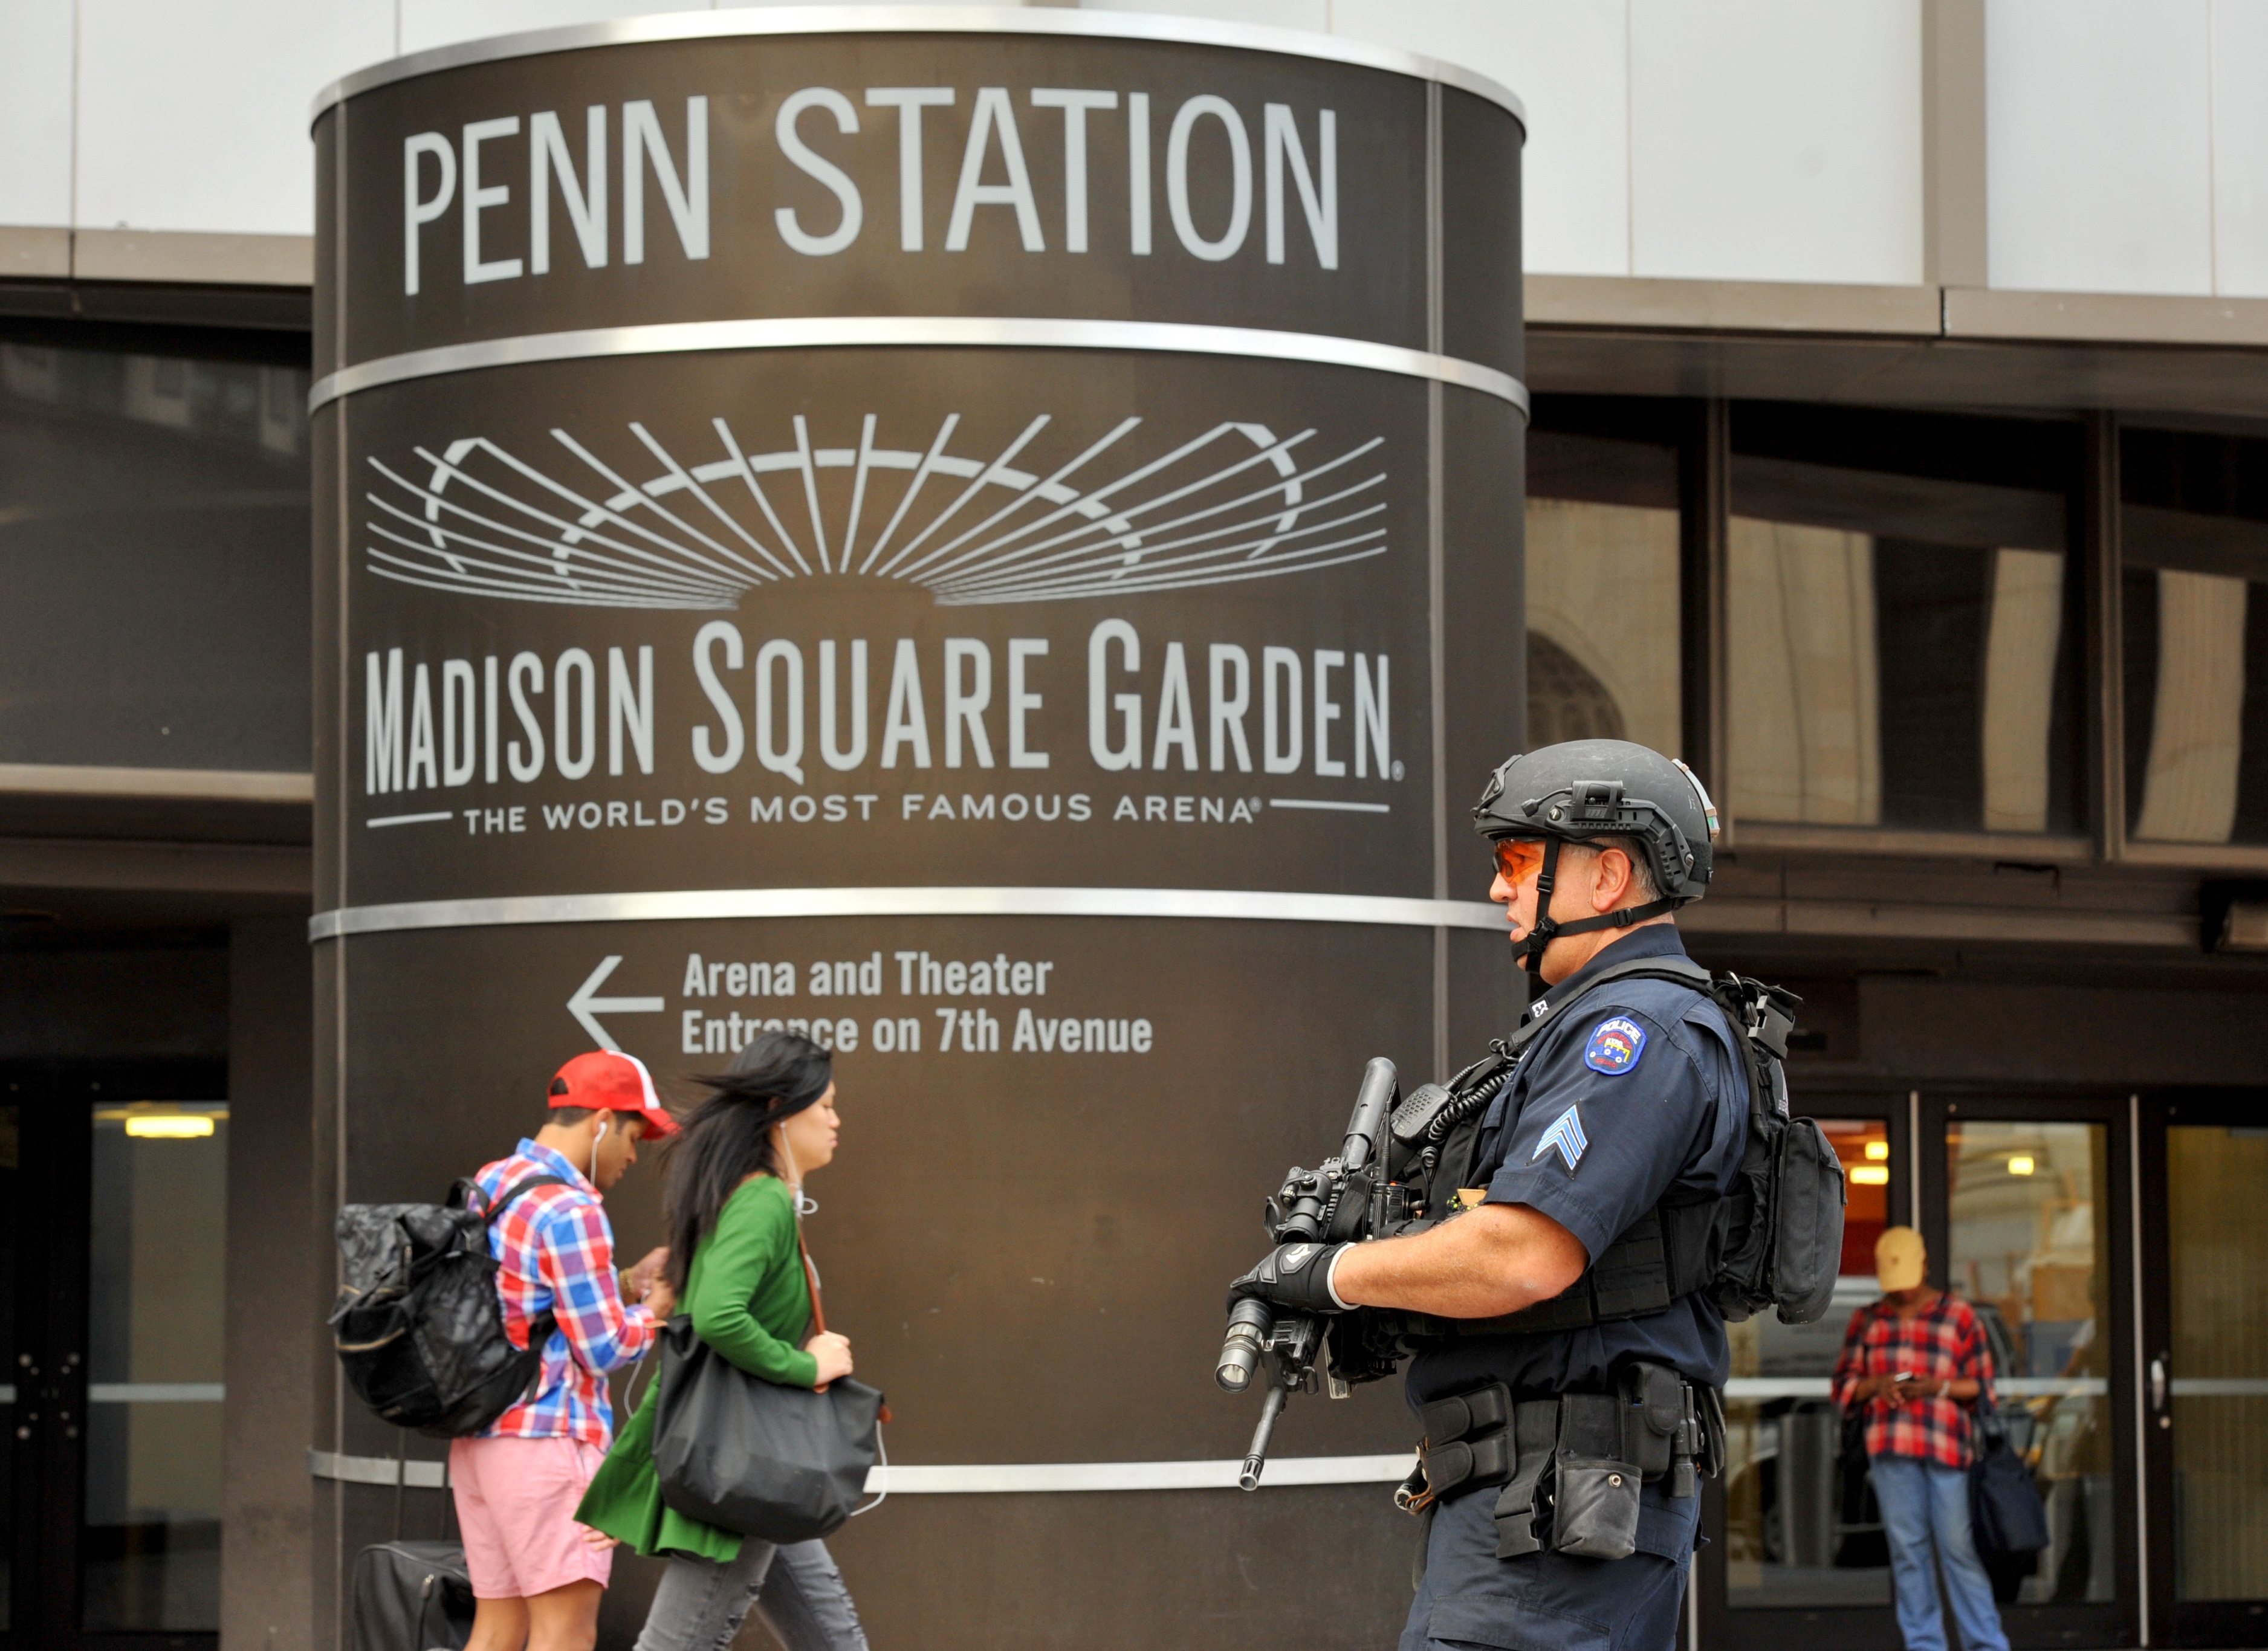 New York Police Department Emergency Service Units patrol outside Penn Station before the start of theNew York Police Department 2016 graduation class ceremony at Madison Square Garden on July, 1, 2016. (TIMOTHY A. CLARY&mdash;AFP/Getty Images)